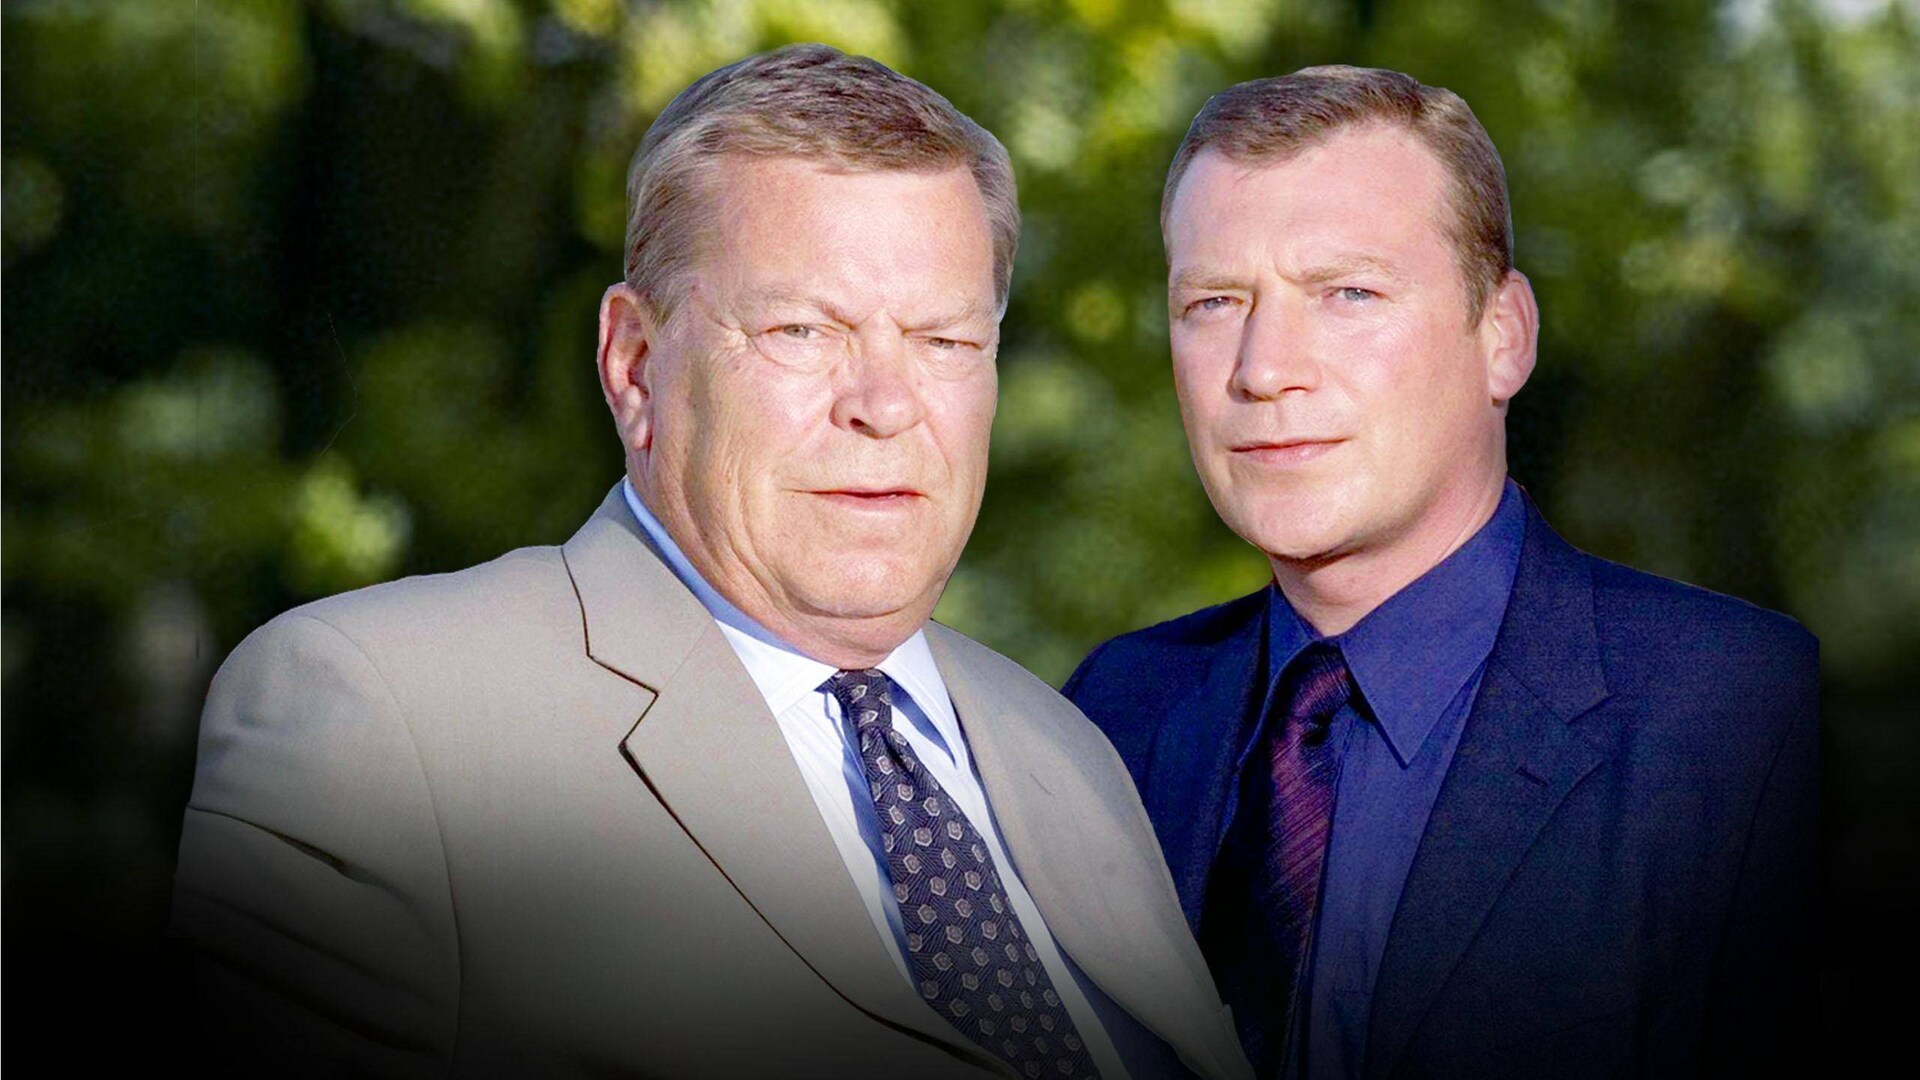 Dalziel and Pascoe - Series 1 - Episode 1 - ITVX